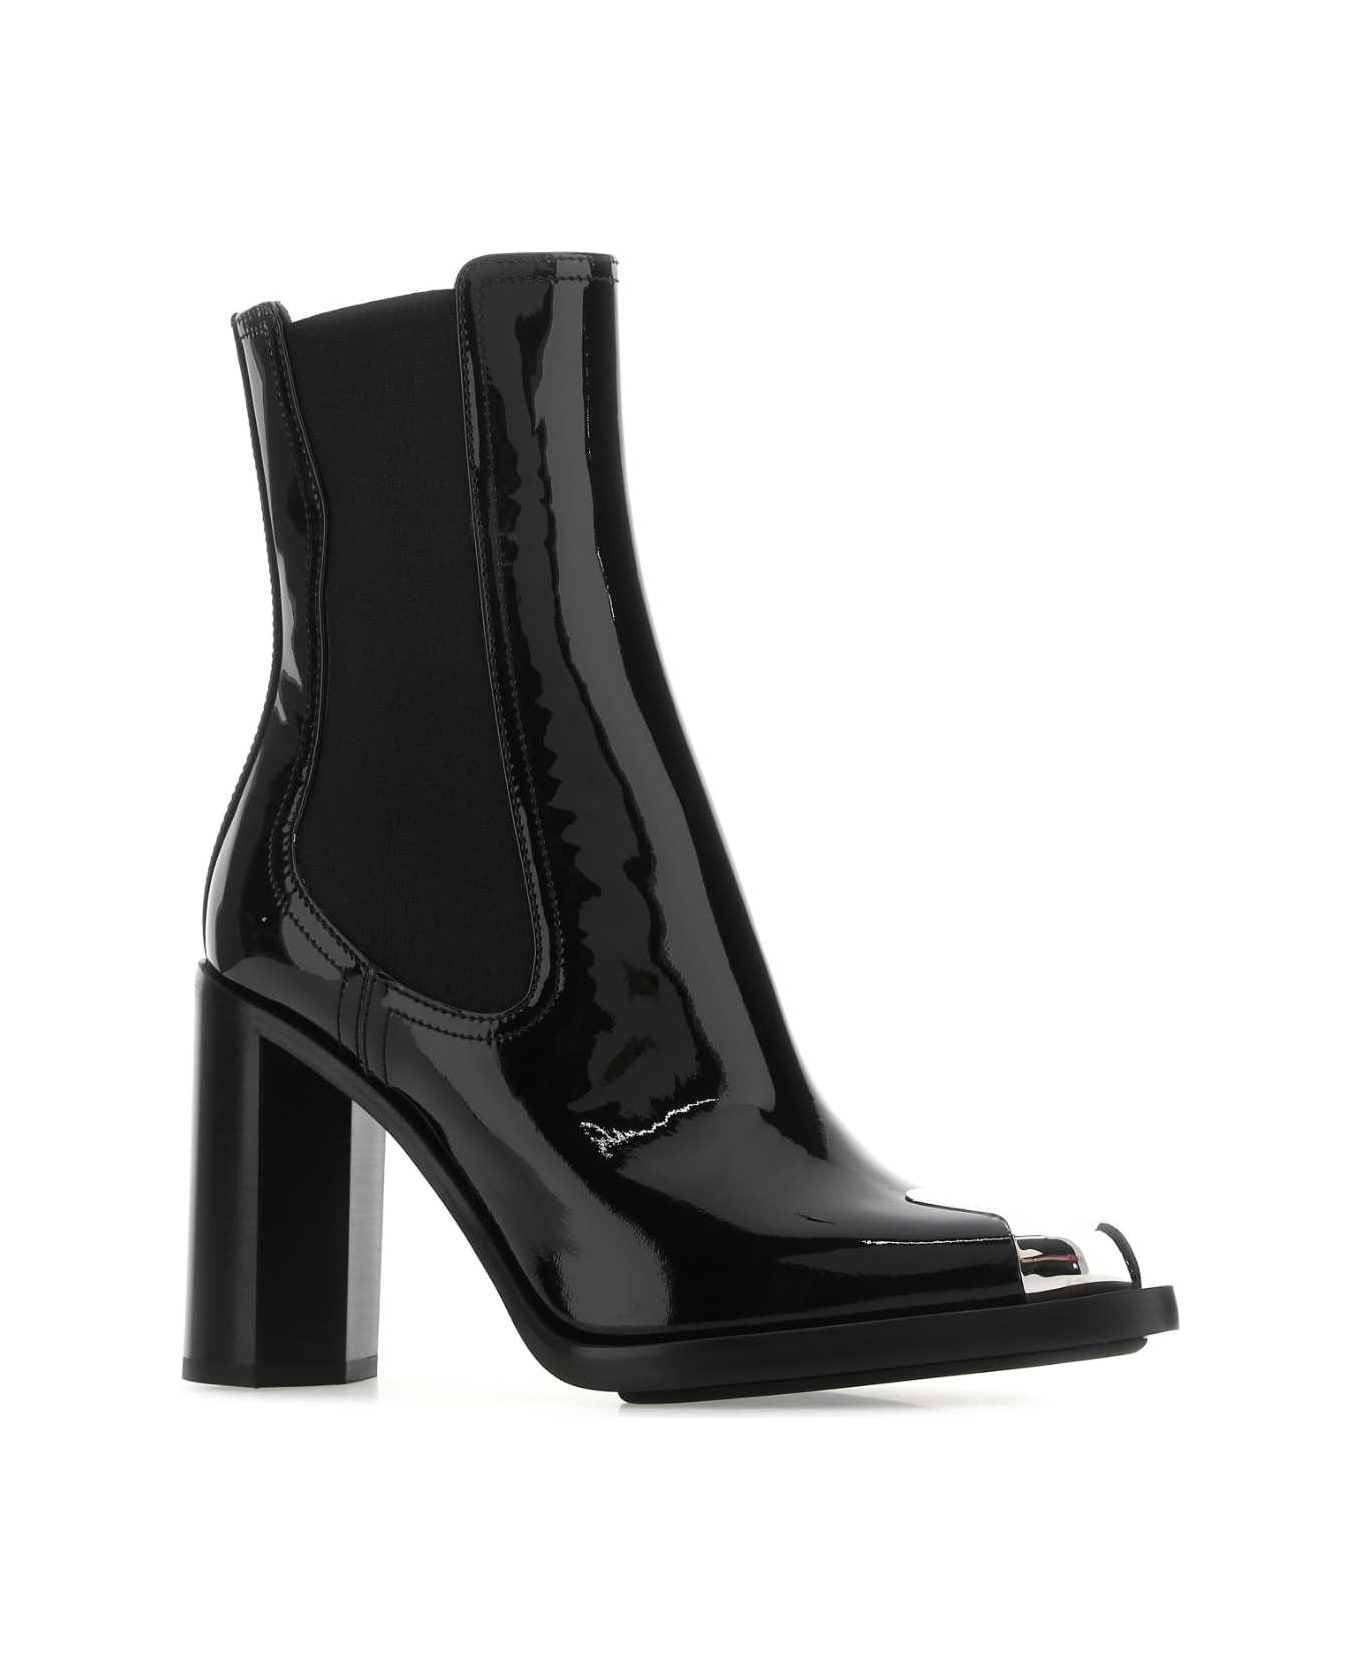 Alexander McQueen Black Leather Ankle Boots - 1081